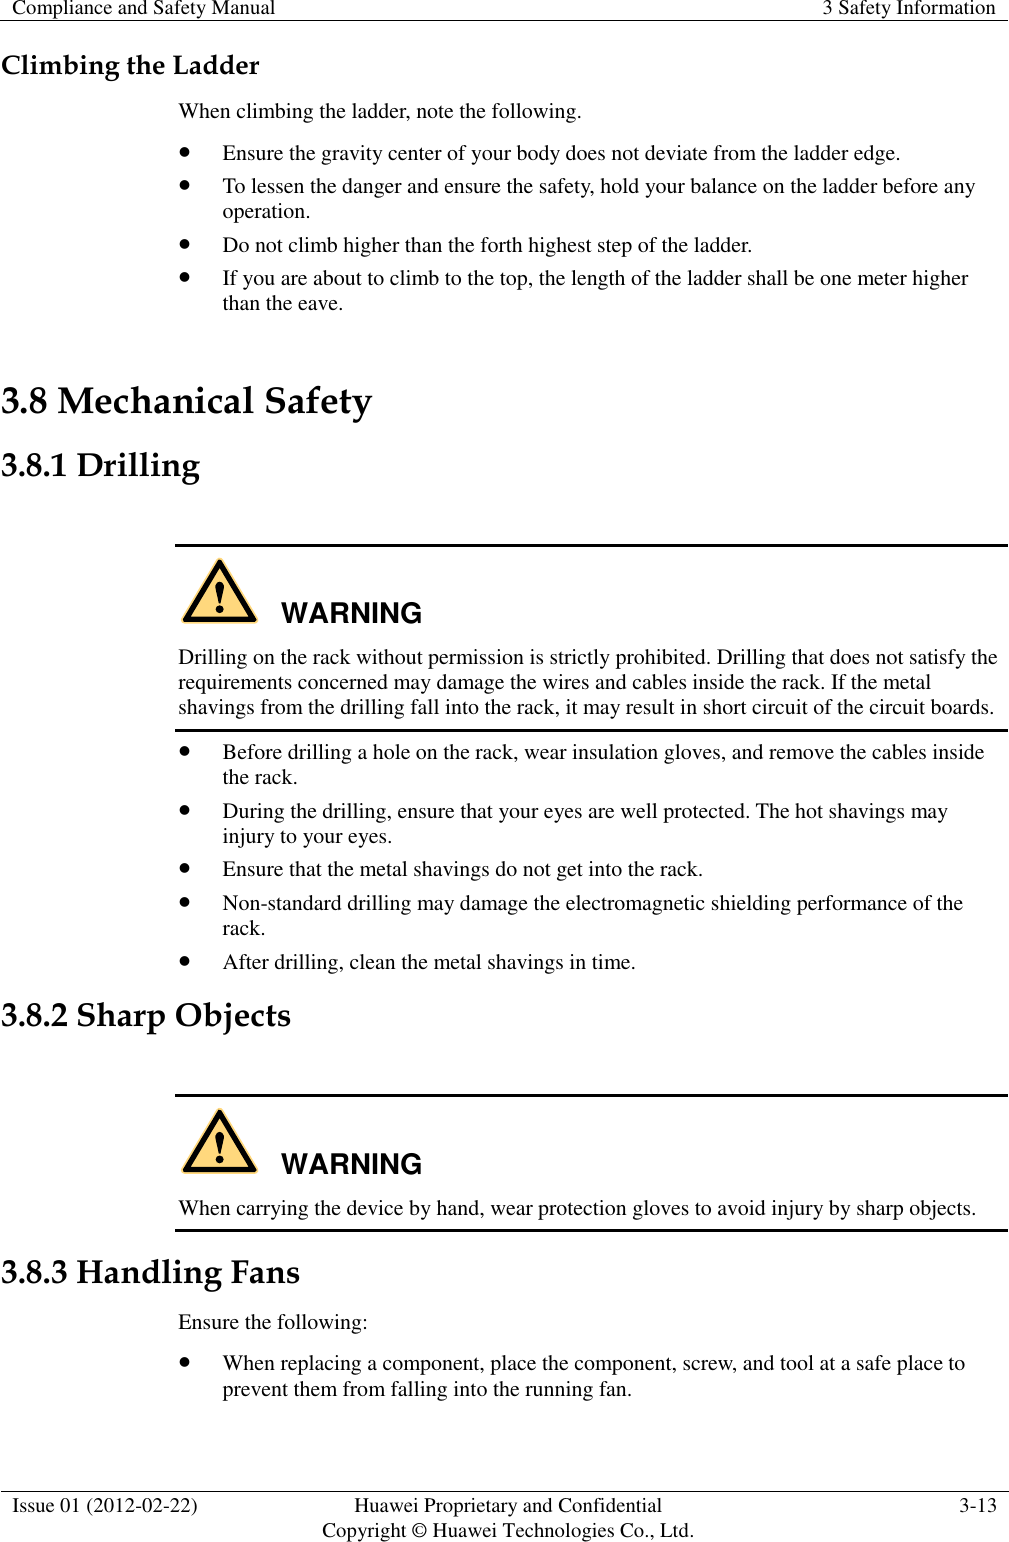 Compliance and Safety Manual 3 Safety Information  Issue 01 (2012-02-22) Huawei Proprietary and Confidential           Copyright © Huawei Technologies Co., Ltd. 3-13  Climbing the Ladder When climbing the ladder, note the following.  Ensure the gravity center of your body does not deviate from the ladder edge.  To lessen the danger and ensure the safety, hold your balance on the ladder before any operation.  Do not climb higher than the forth highest step of the ladder.  If you are about to climb to the top, the length of the ladder shall be one meter higher than the eave. 3.8 Mechanical Safety 3.8.1 Drilling  WARNING Drilling on the rack without permission is strictly prohibited. Drilling that does not satisfy the requirements concerned may damage the wires and cables inside the rack. If the metal shavings from the drilling fall into the rack, it may result in short circuit of the circuit boards.  Before drilling a hole on the rack, wear insulation gloves, and remove the cables inside the rack.  During the drilling, ensure that your eyes are well protected. The hot shavings may injury to your eyes.  Ensure that the metal shavings do not get into the rack.  Non-standard drilling may damage the electromagnetic shielding performance of the rack.  After drilling, clean the metal shavings in time. 3.8.2 Sharp Objects  WARNING When carrying the device by hand, wear protection gloves to avoid injury by sharp objects. 3.8.3 Handling Fans Ensure the following:  When replacing a component, place the component, screw, and tool at a safe place to prevent them from falling into the running fan. 